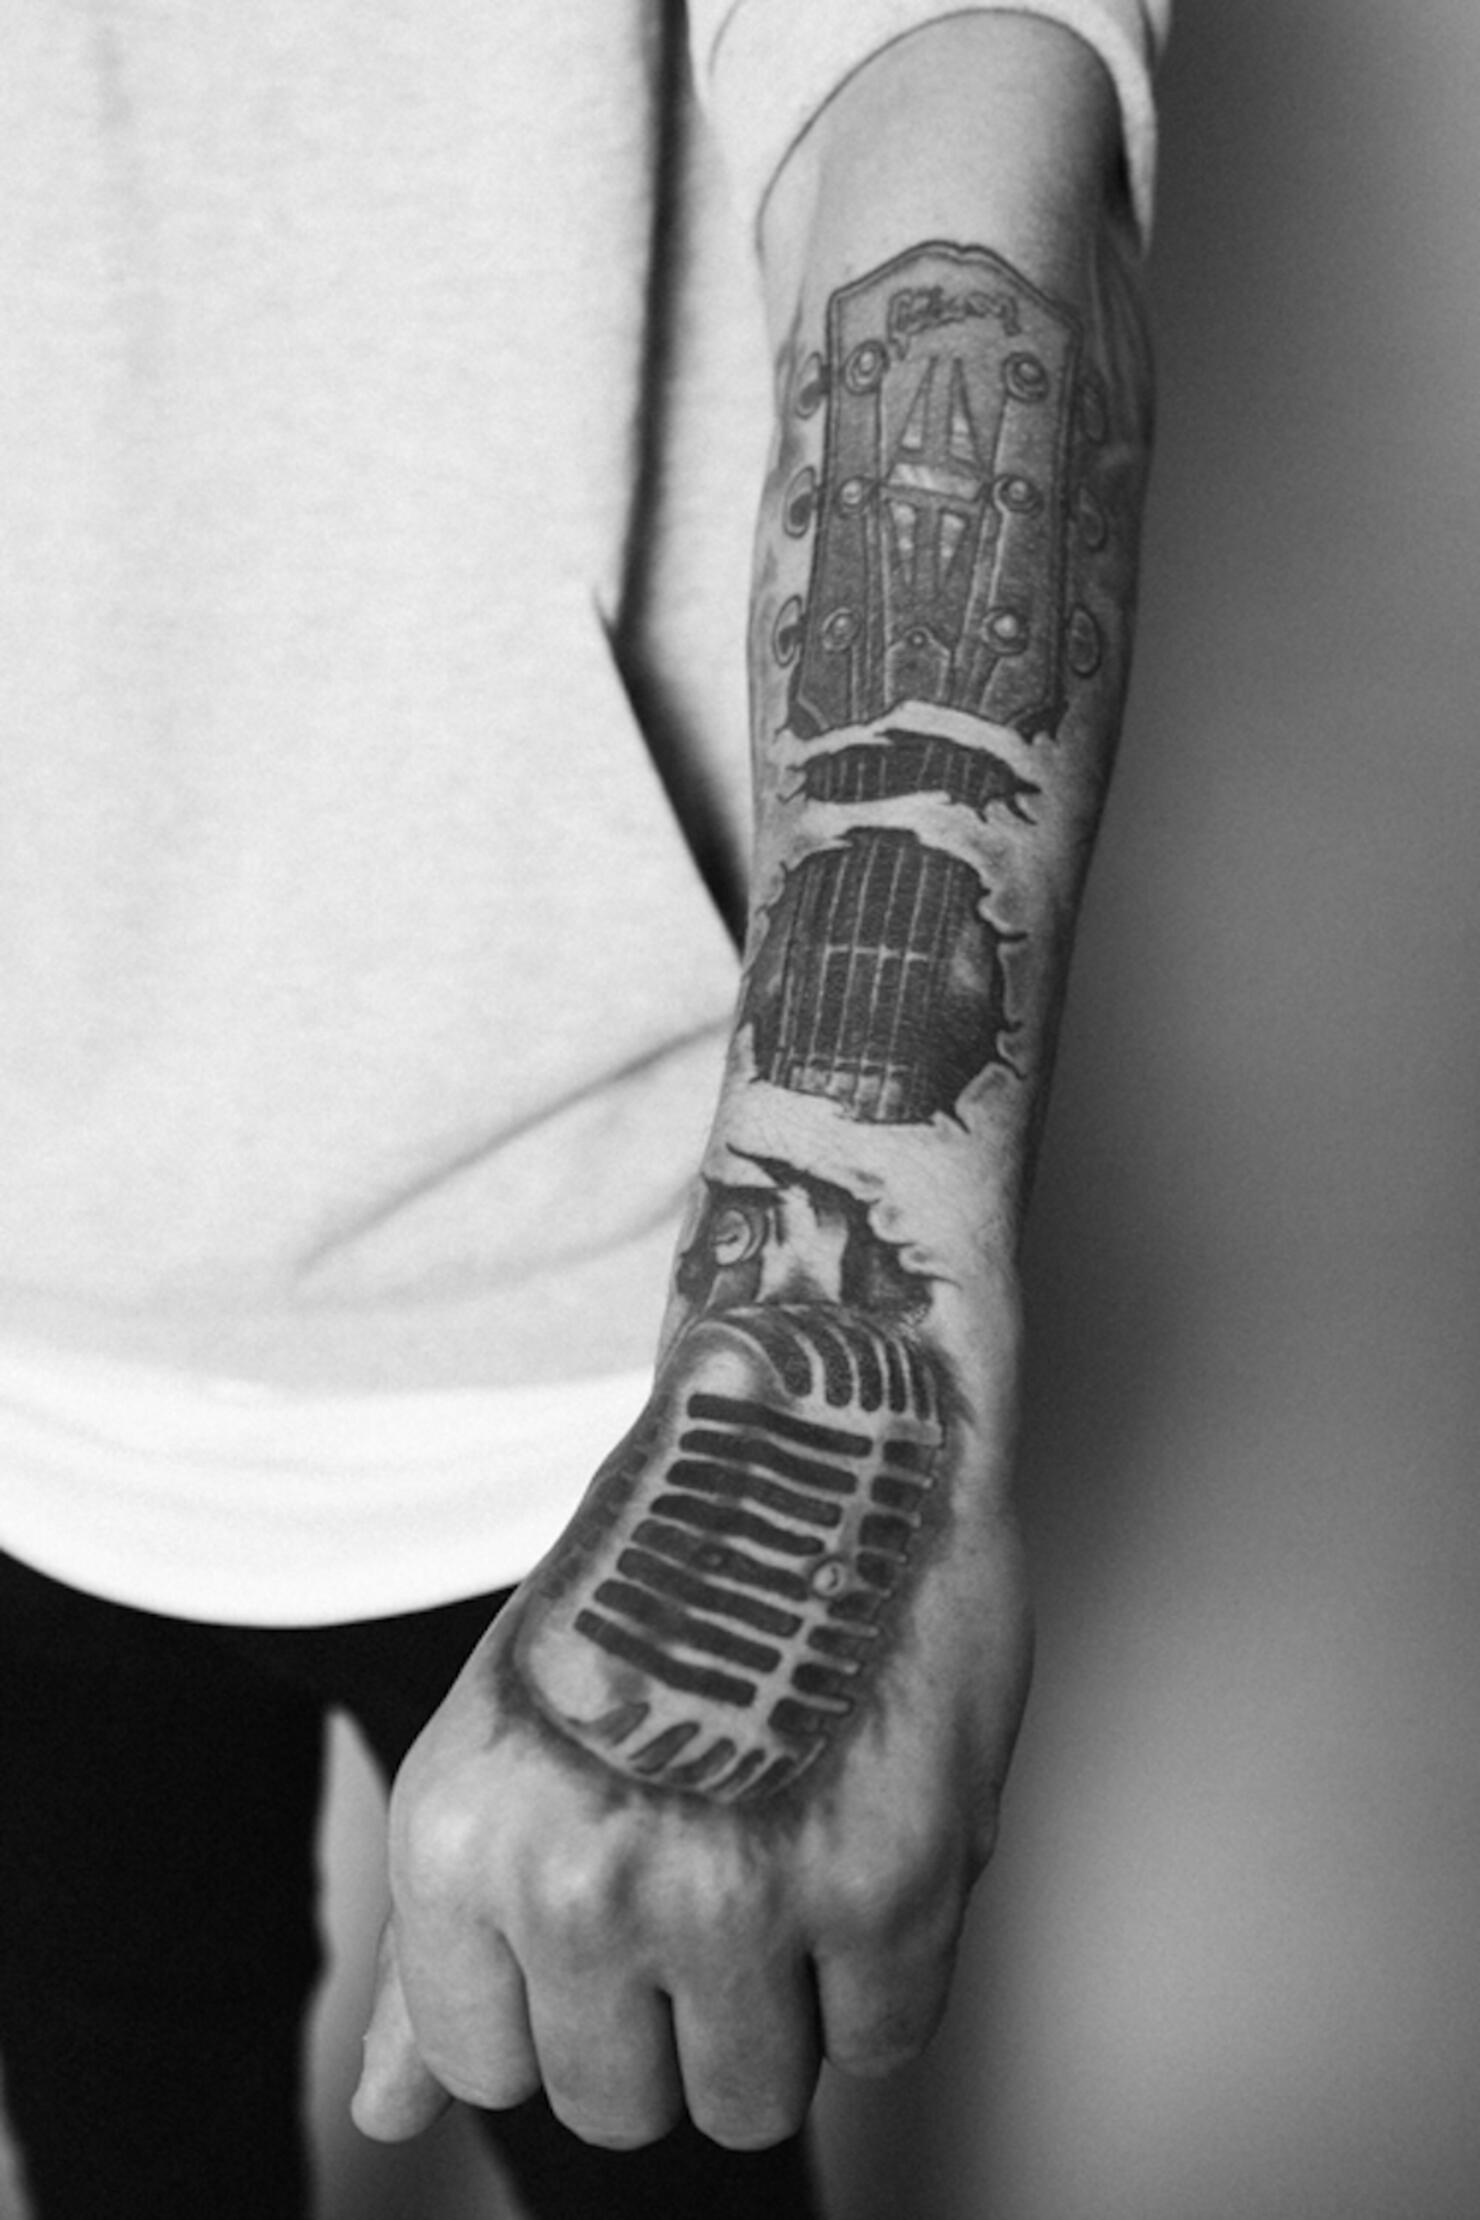 Microphone and Guitar Neck Tattoo on Kane Brown's Left Forearm and Hand